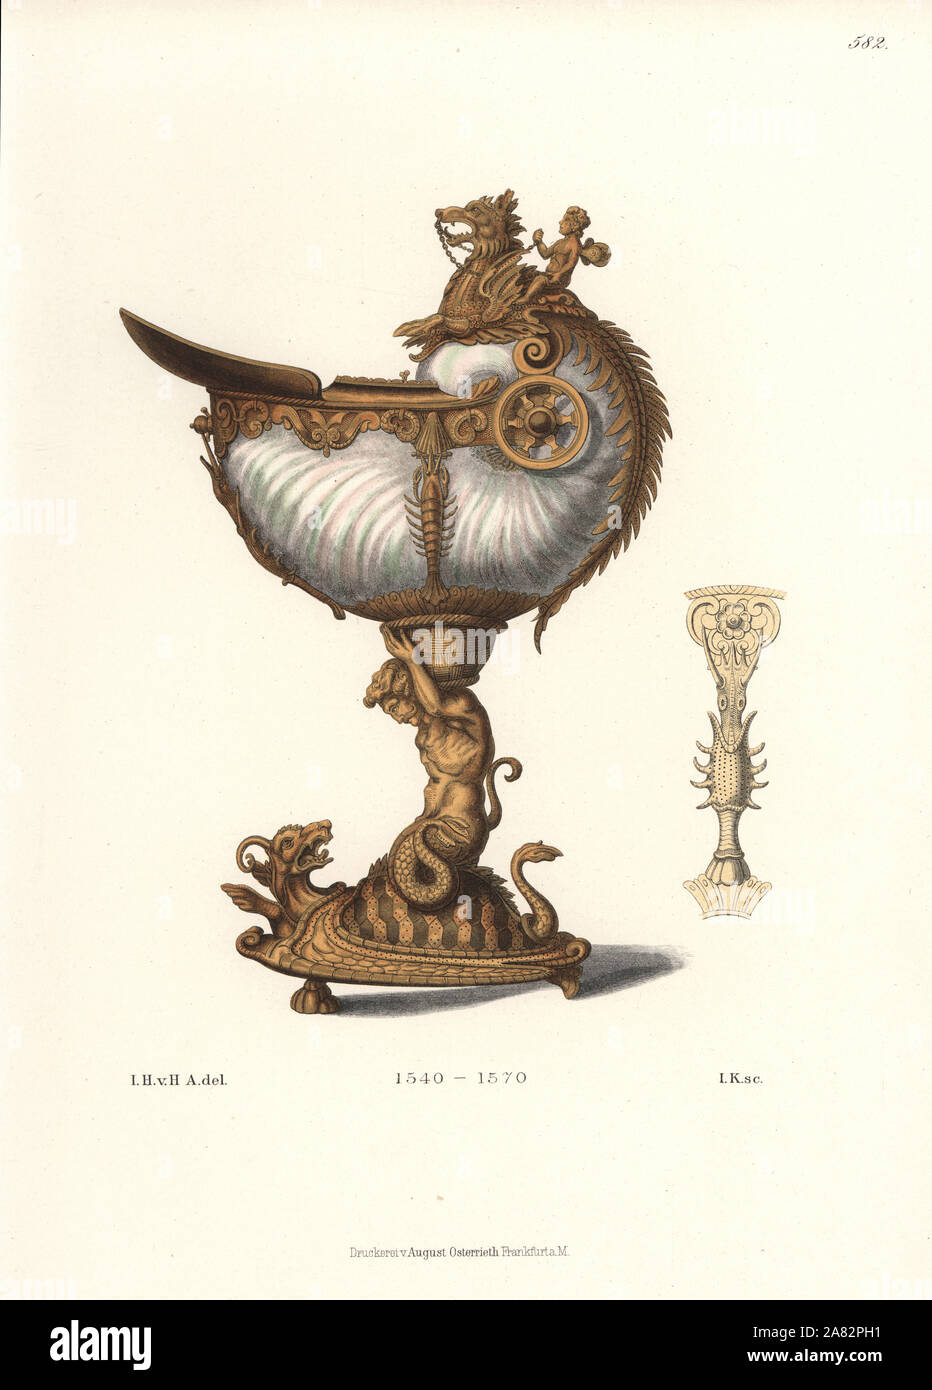 German cup made out of a nautilus shell decorated with gilded silver nautical ornaments, mid 16th century. Chromolithograph from Hefner-Alteneck's Costumes, Artworks and Appliances from the Middle Ages to the 17th Century, Frankfurt, 1889. Illustration by Dr. Jakob Heinrich von Hefner-Alteneck, lithographed by Heinrich Keller. Dr. Hefner-Alteneck (1811-1903) was a German museum curator, archaeologist, art historian, illustrator and etcher. Stock Photo